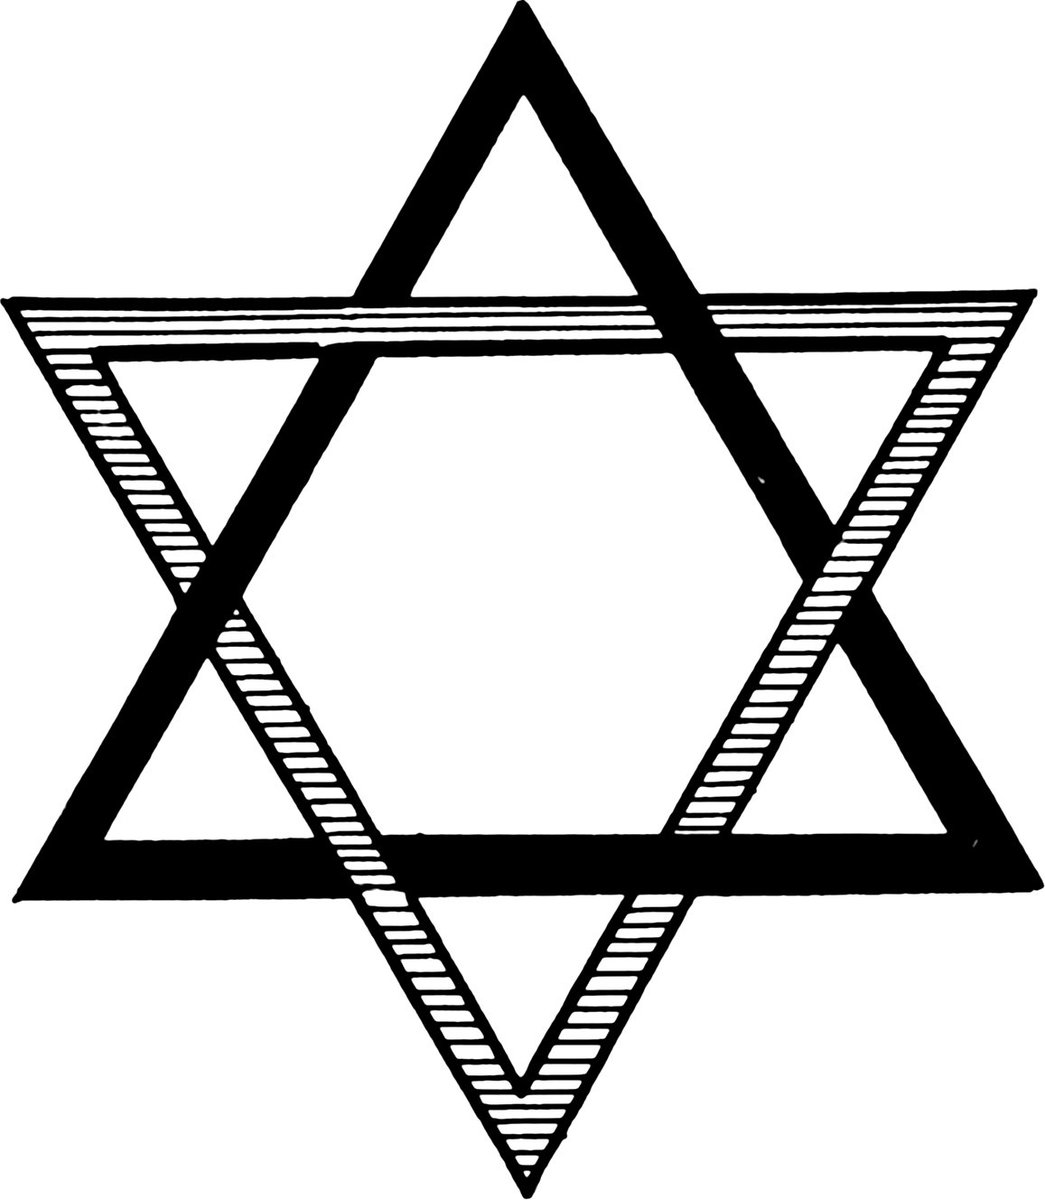 71. ... The Star of David and the Seal of Solomon.